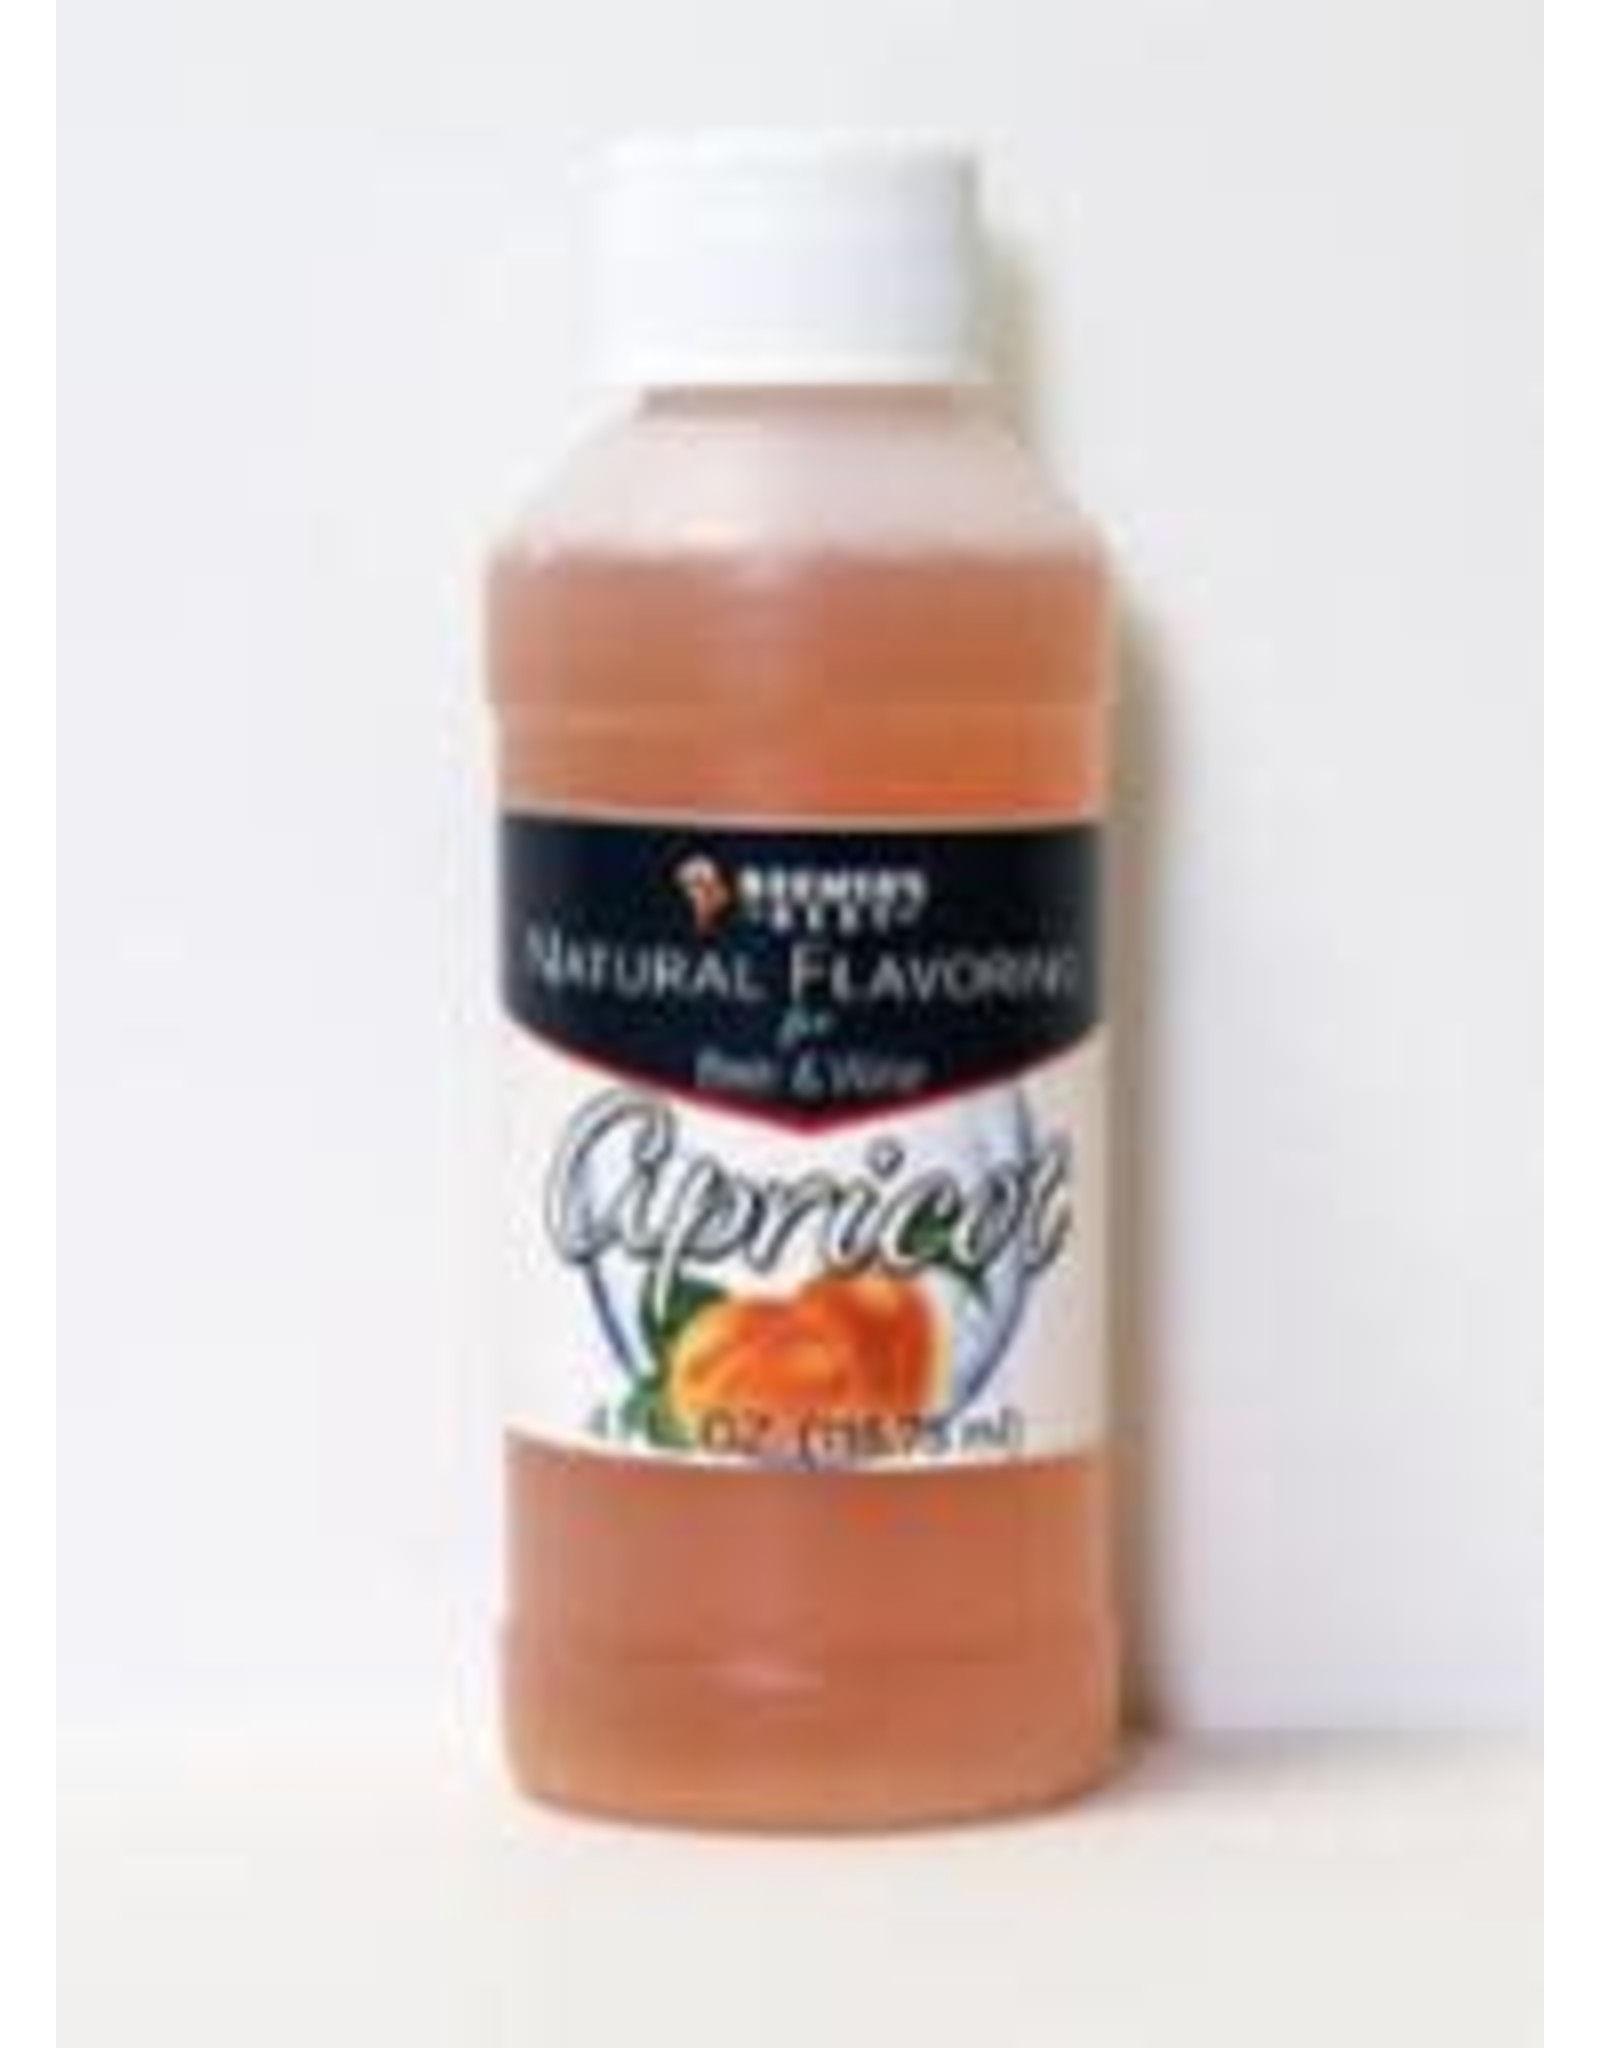 Brewer's Best All natural extract 4 oz Apricot